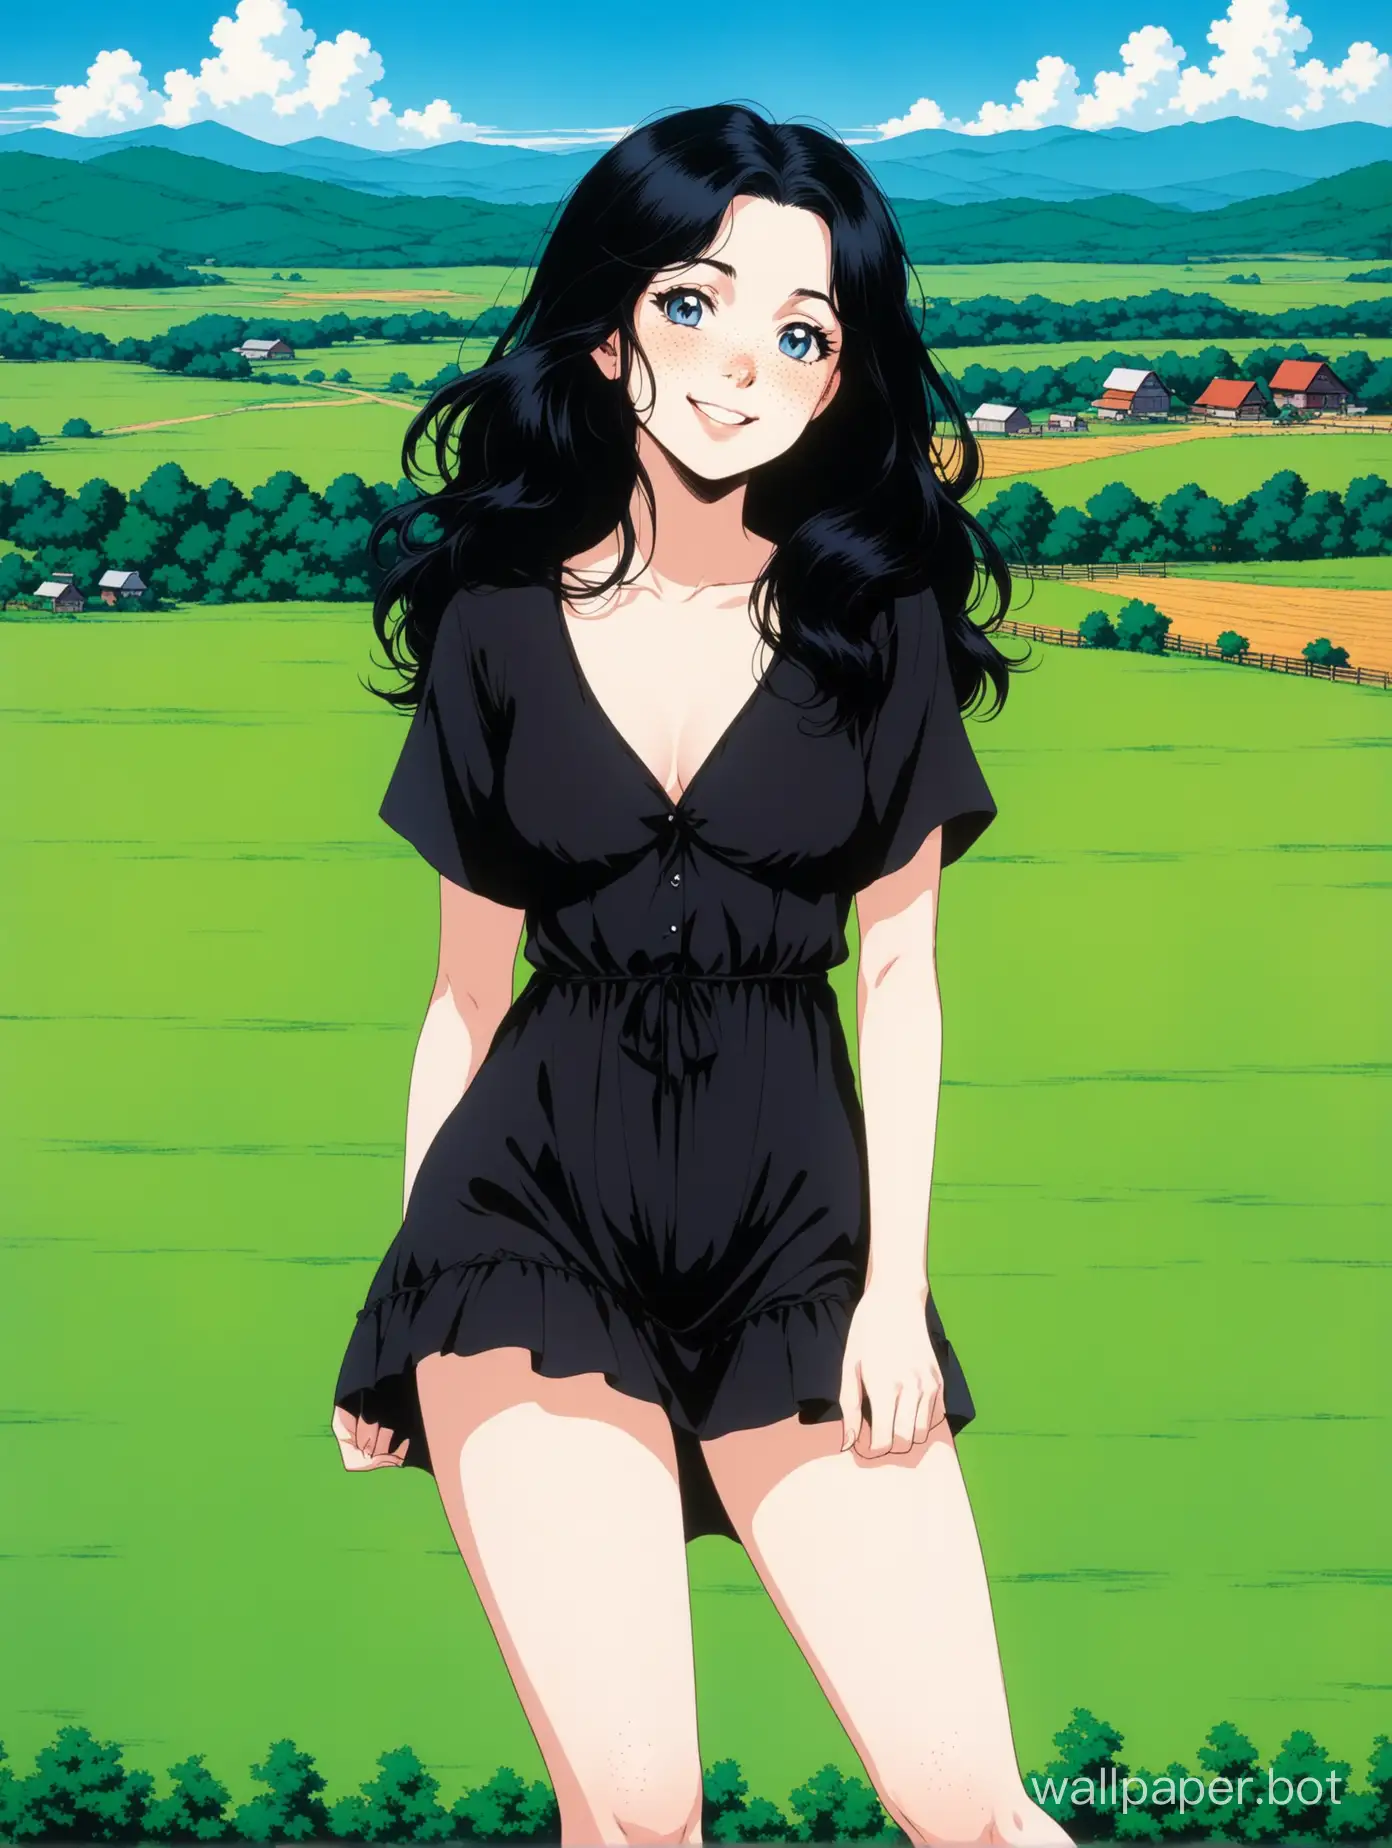  american countryside background, a beautiful 18 year old white woman, mature face, goth girl, she is pretty, she has blue eyes, she has pale skin, she has lots of freckles, she has long jet-black hair that is wavy and parted in the middle, black sundress, big pale thighs, skinny, smiling, beaming, mature face, deep plunging v, perfect, sense of wonder, retro 1980s anime